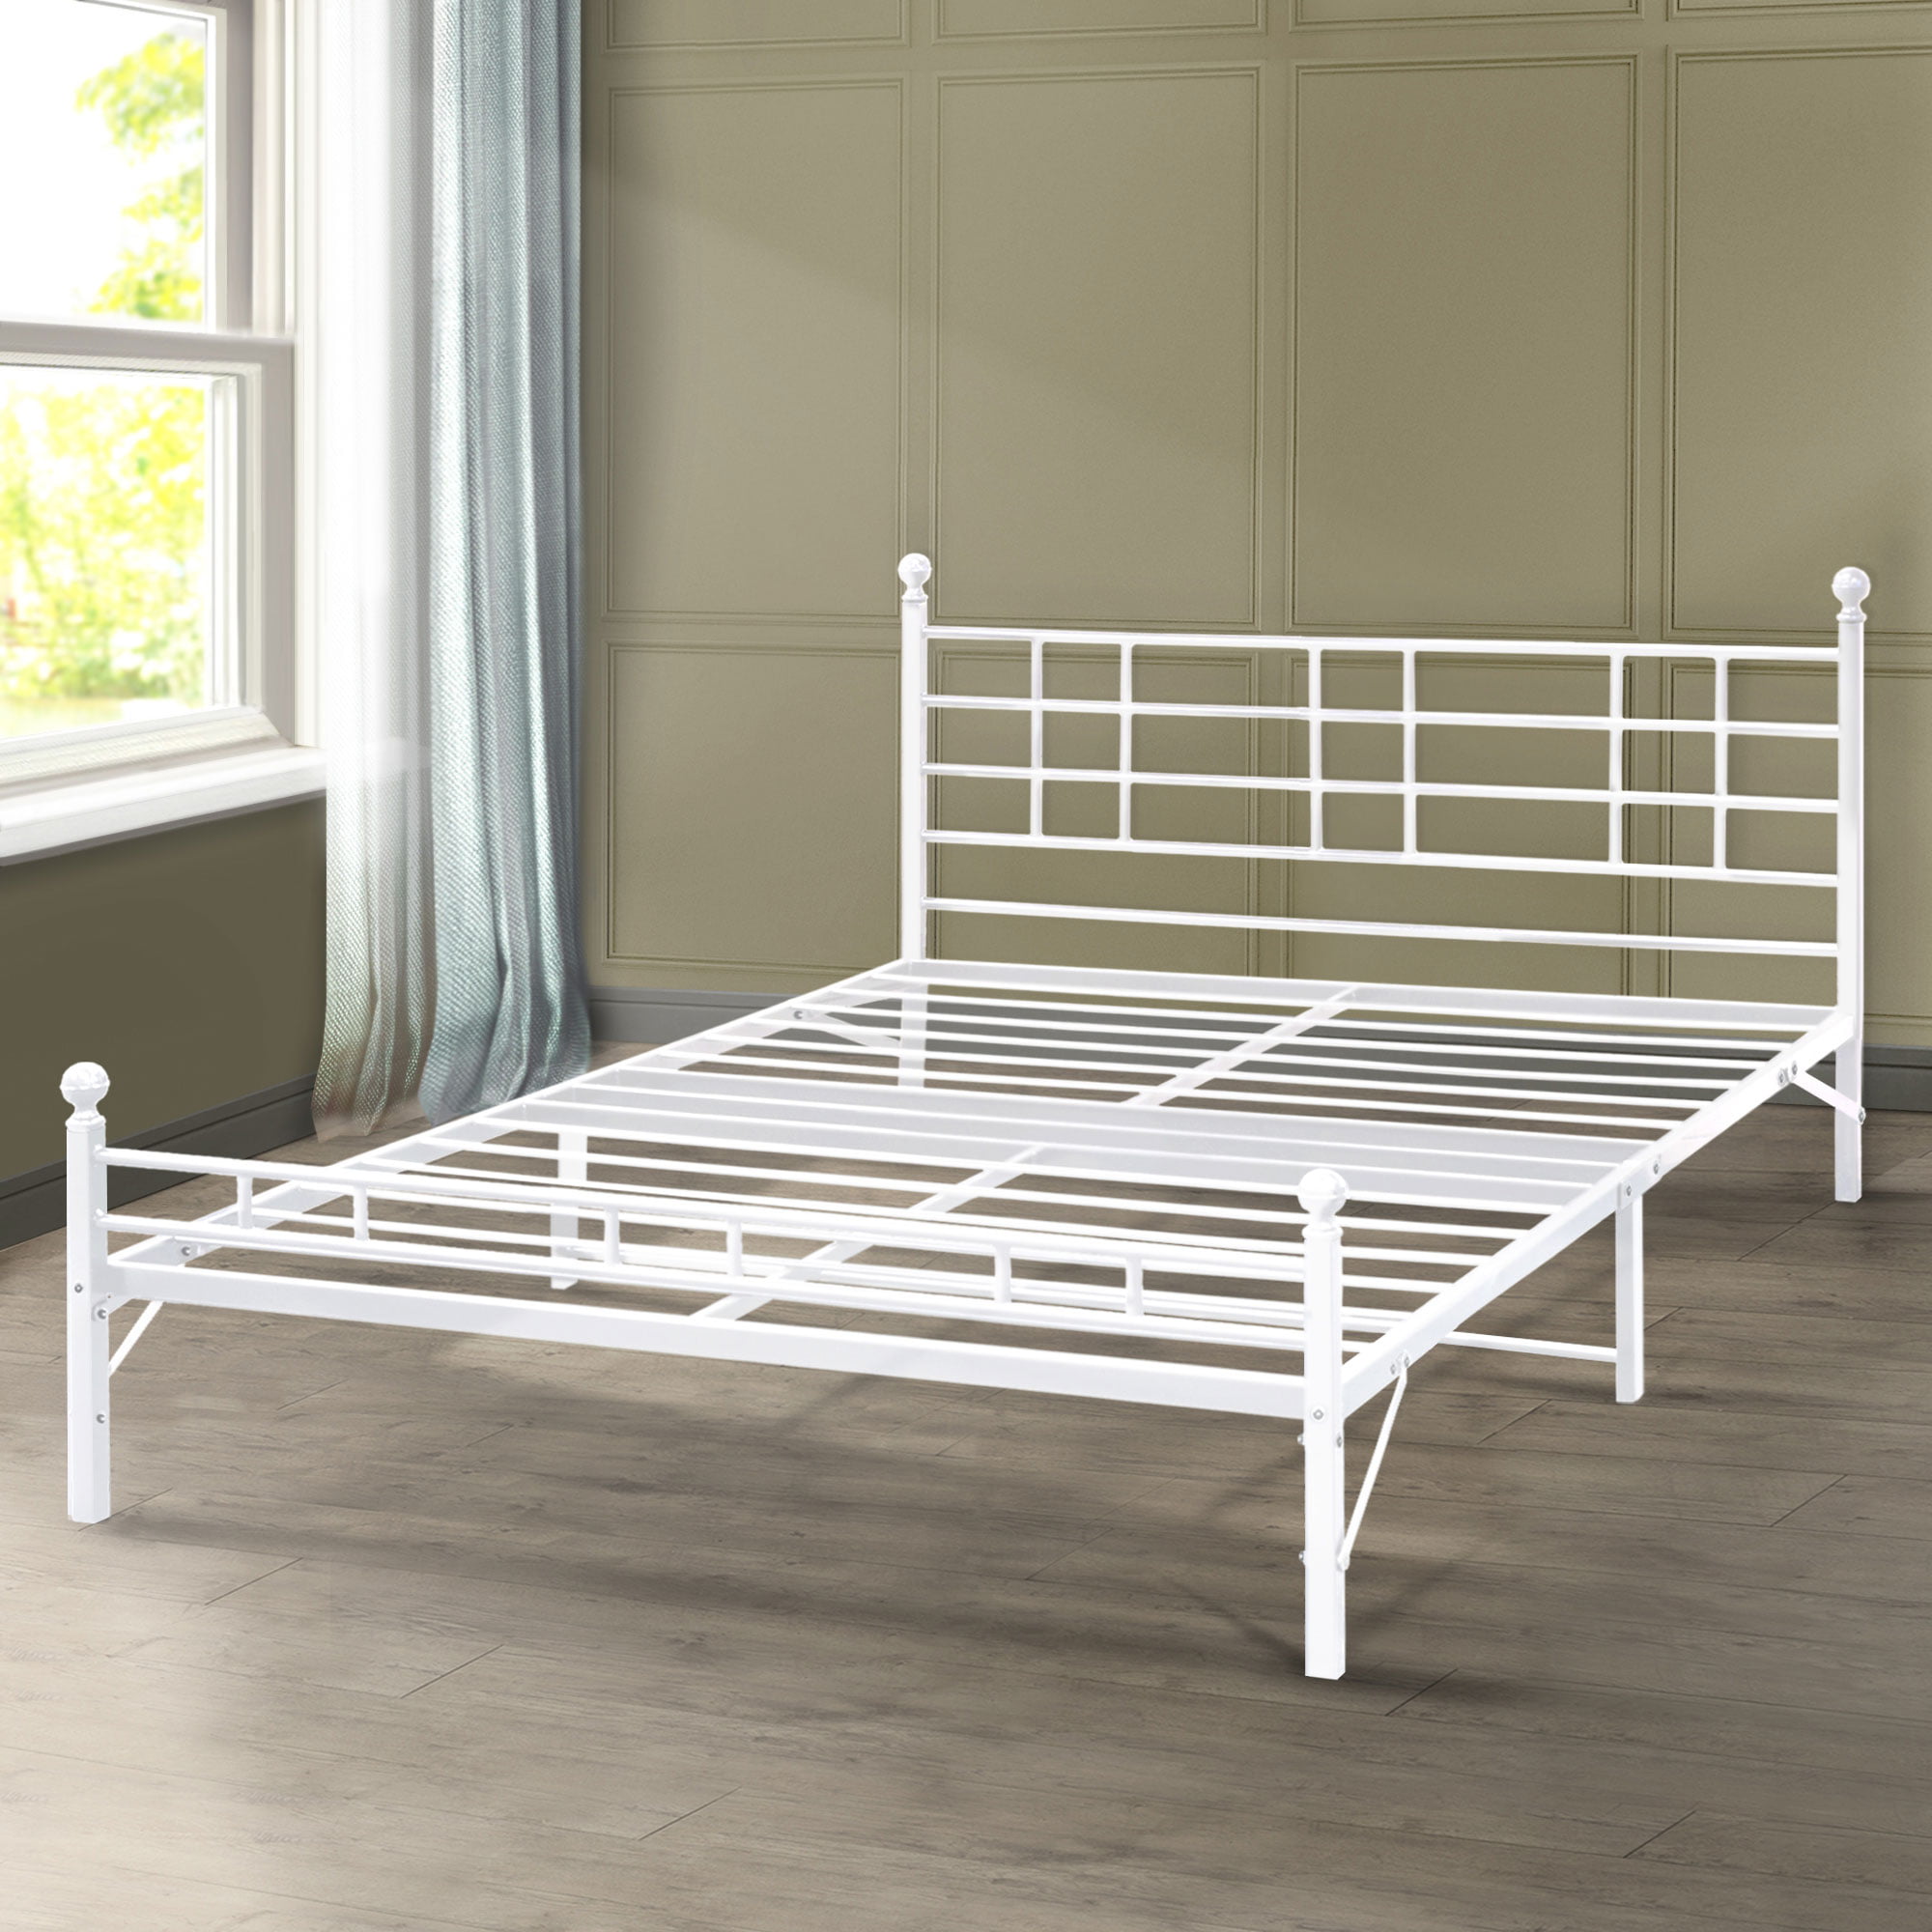 Platform Bed White Queen, How To Put Up A Bed Frame